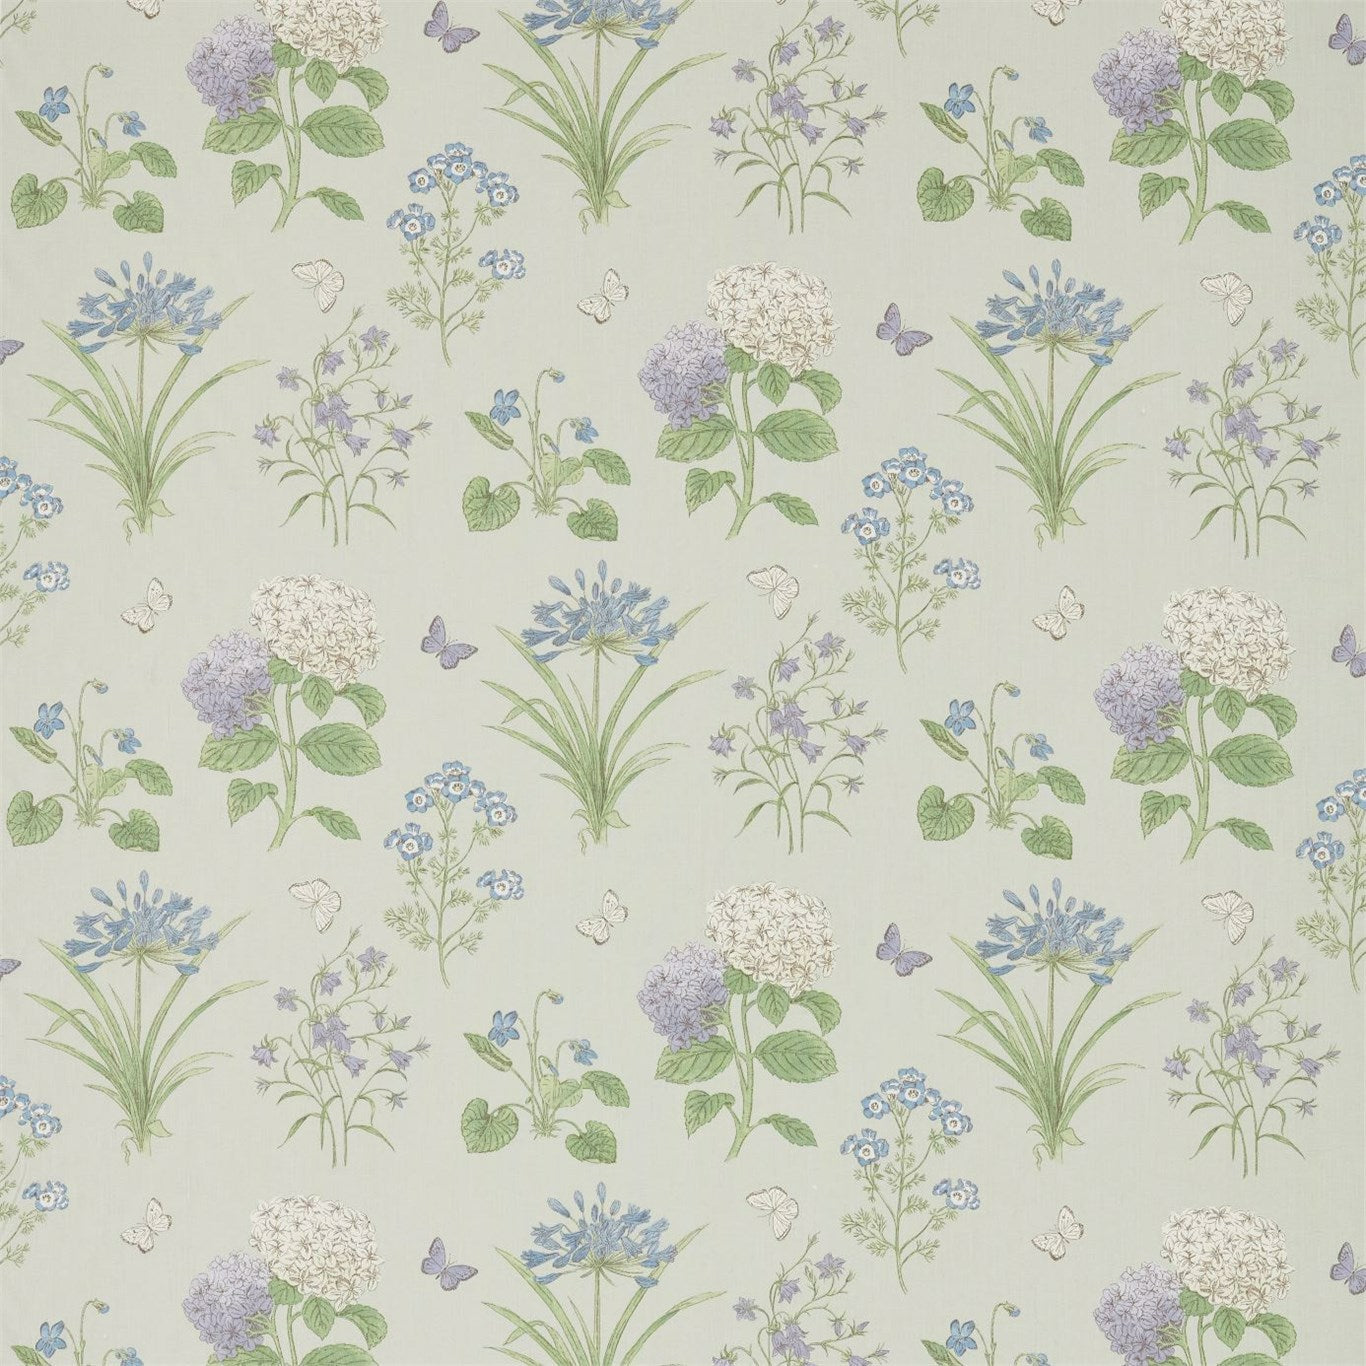 Harebells and Violets Sorrel/Sky Blue Fabric By Sanderson